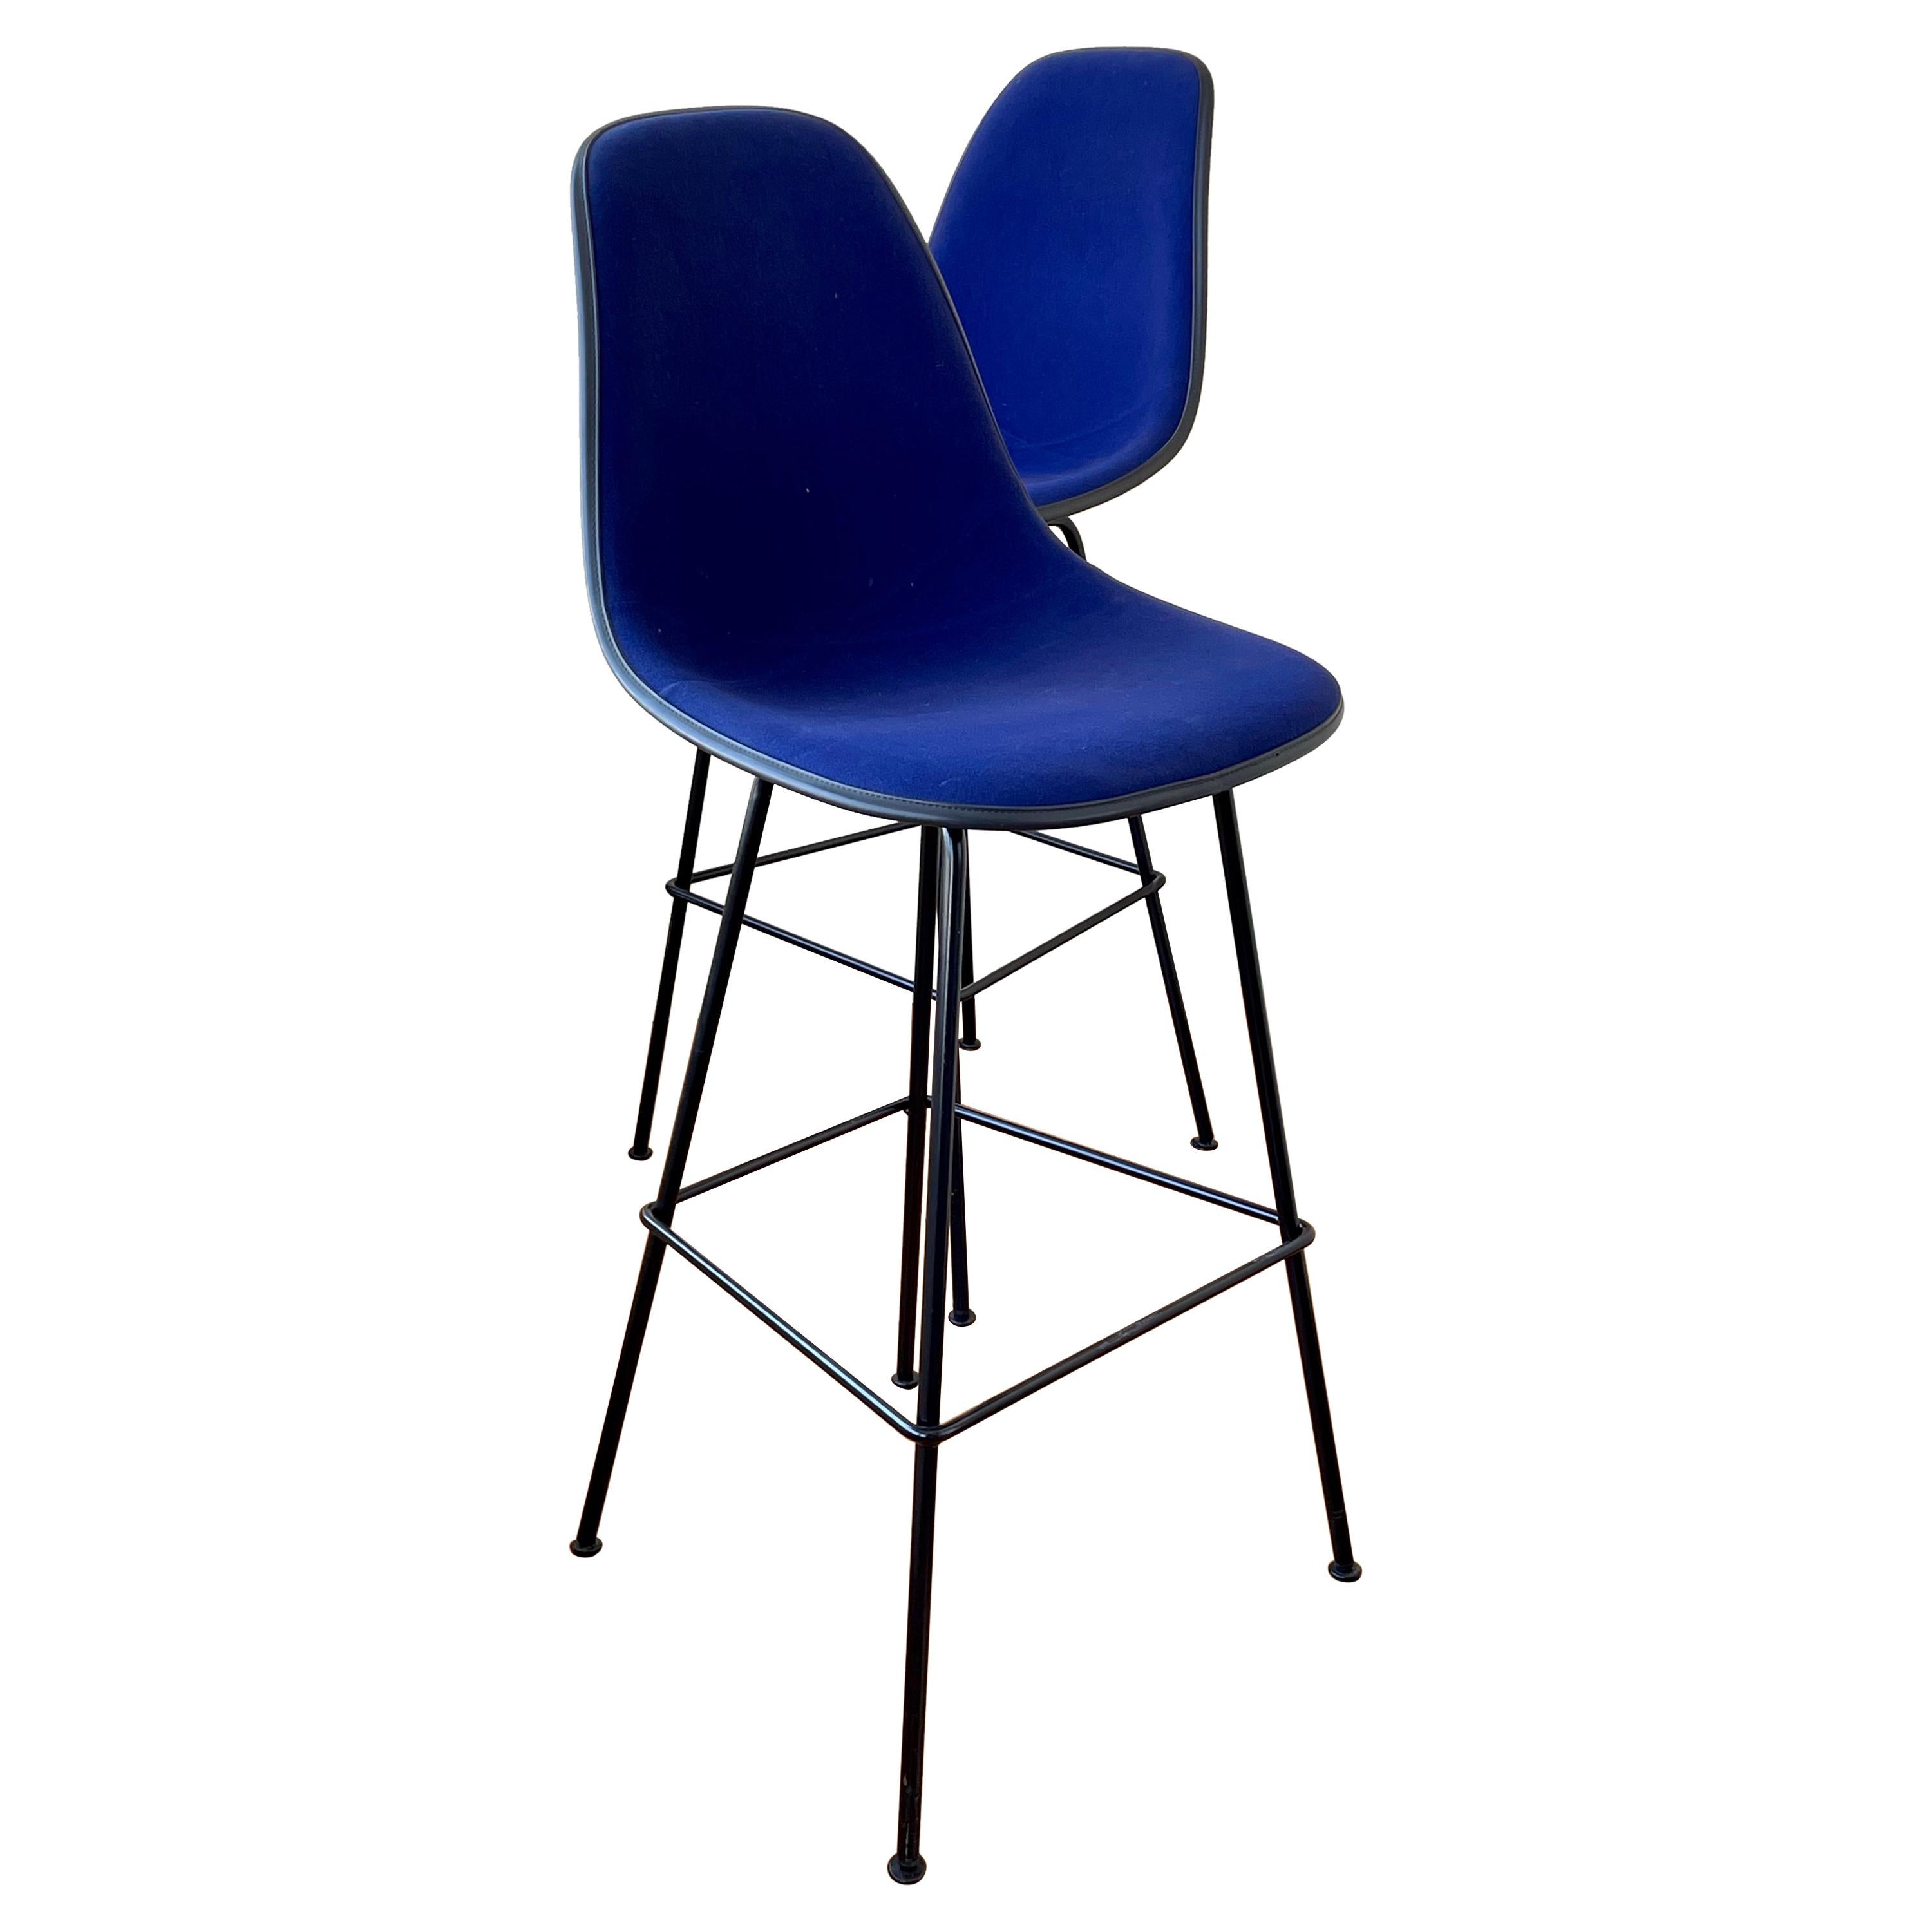 Pair of Barstools Designed by Eames for Herman Miller with Blue Velvet Covers